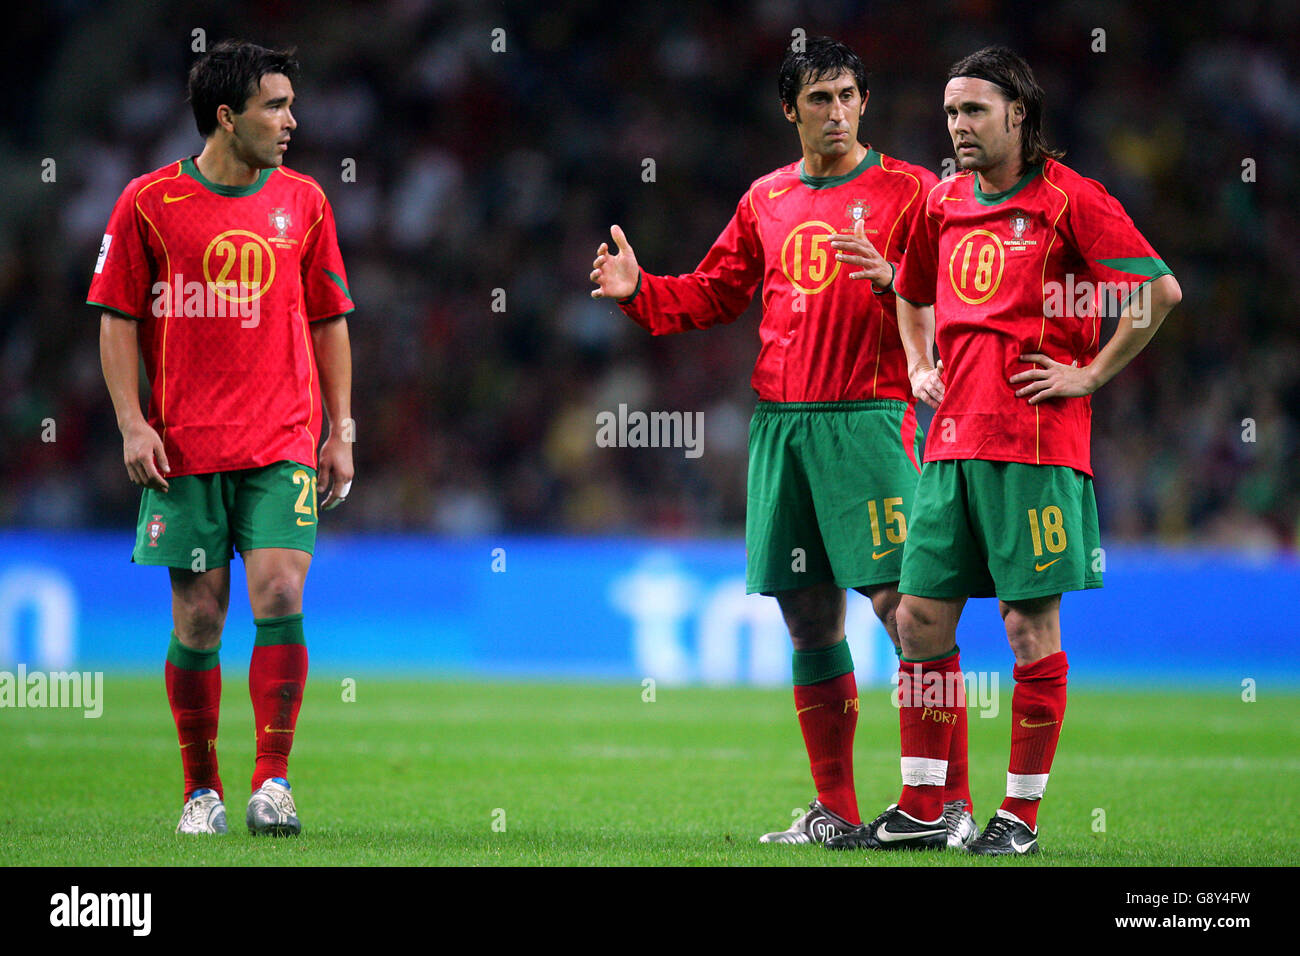 Soccer - FIFA World Cup 2006 Qualifier - Group Three - Portugal v Latvia - Dragao Stadium. Portugal's Deco, Caneira and Maniche Stock Photo